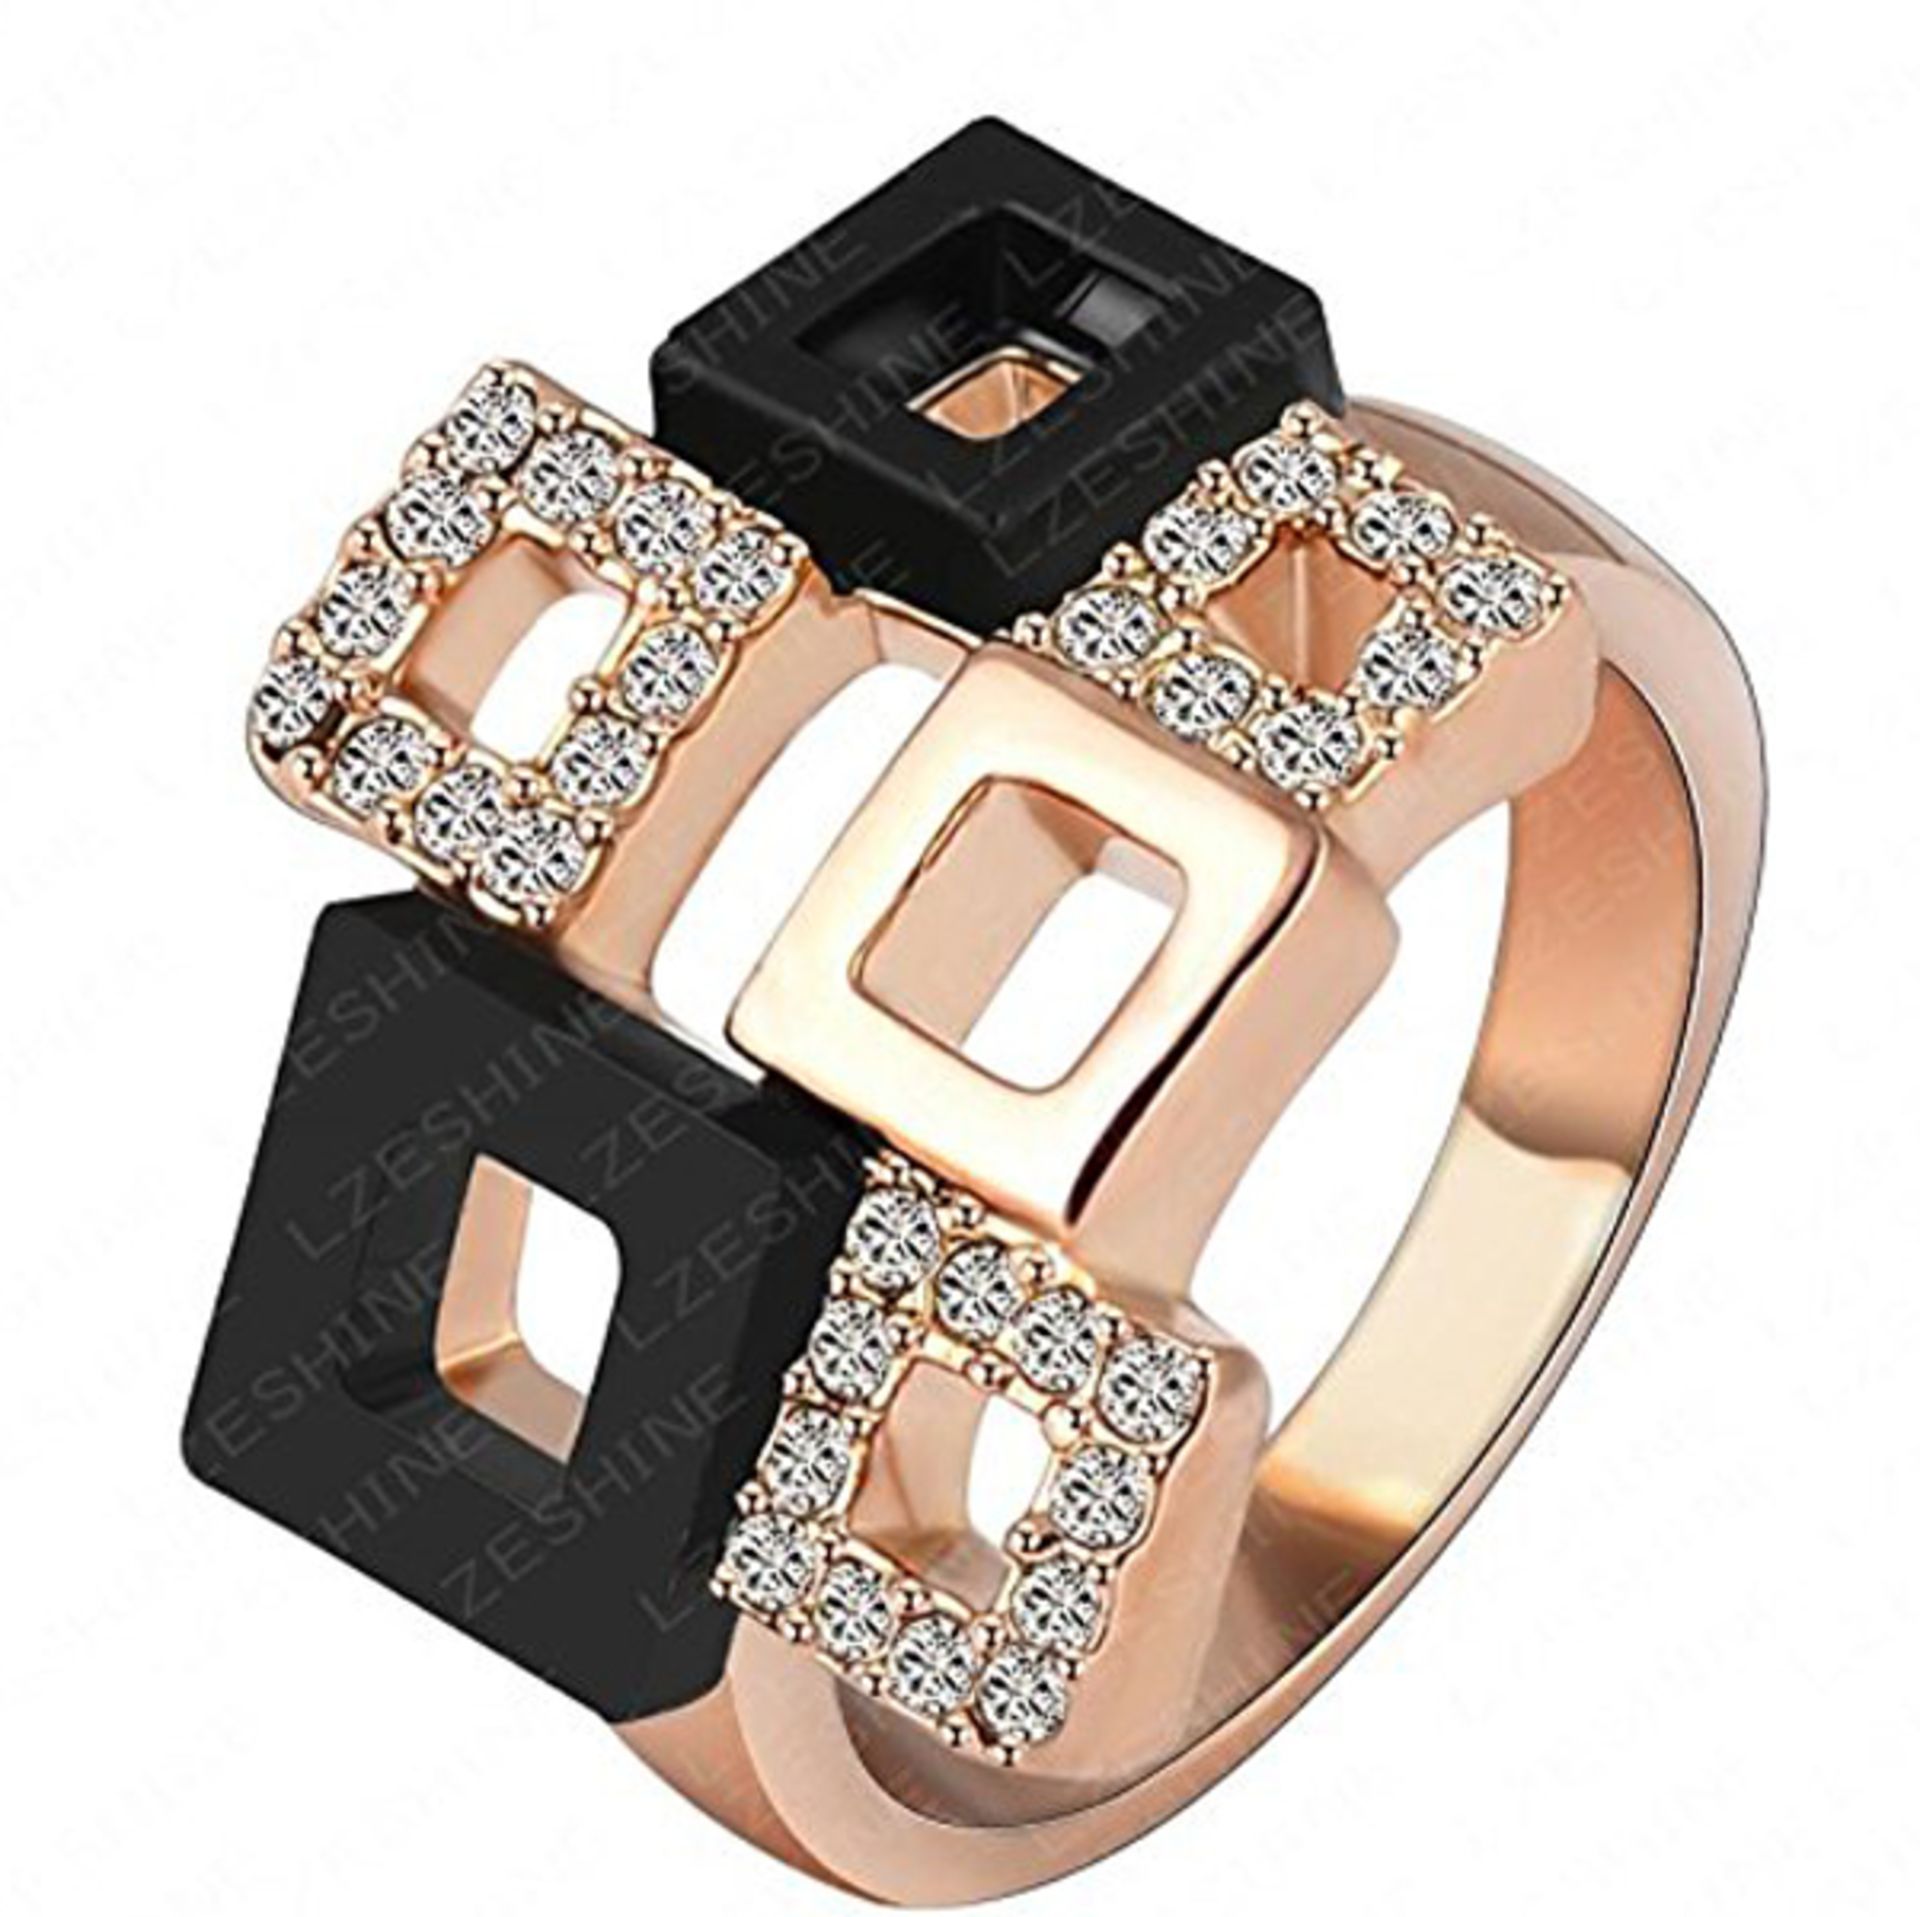 V Brand New Rose Colour Modern Square Design Ring with White Stones X 2 YOUR BID PRICE TO BE